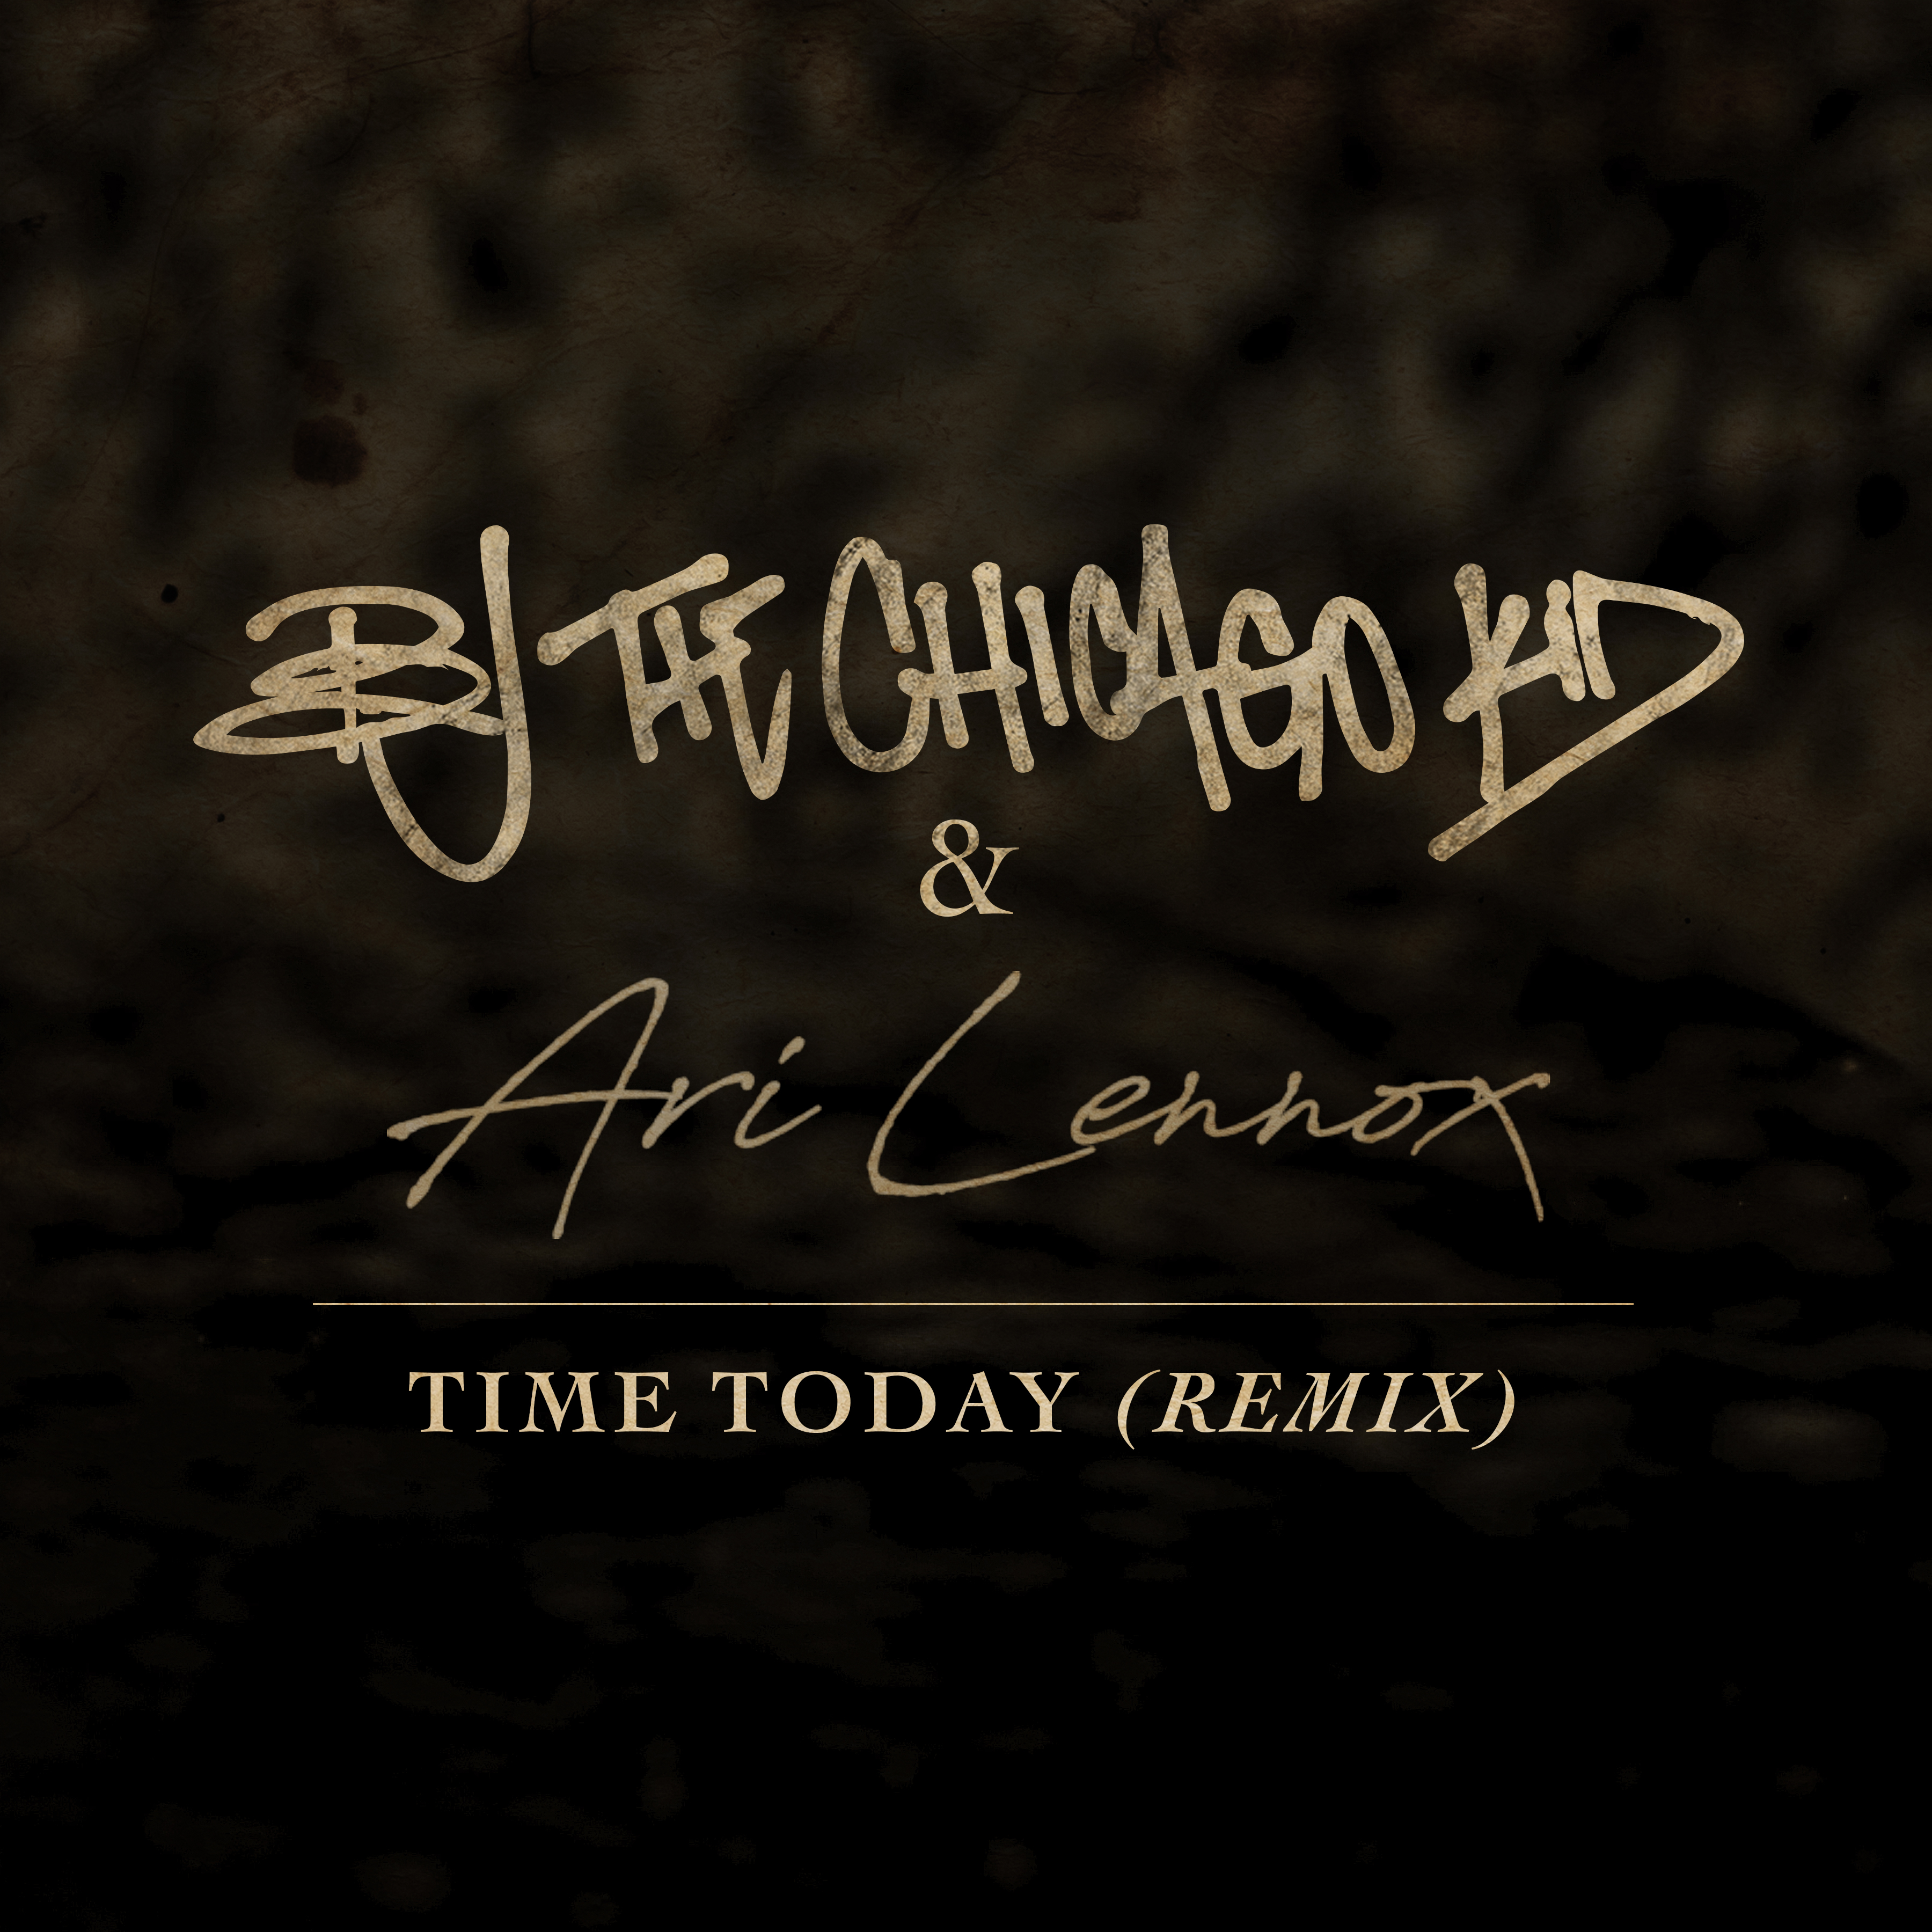 New Music: BJ the Chicago Kid - Time Today (Remix featuring Ari Lennox)